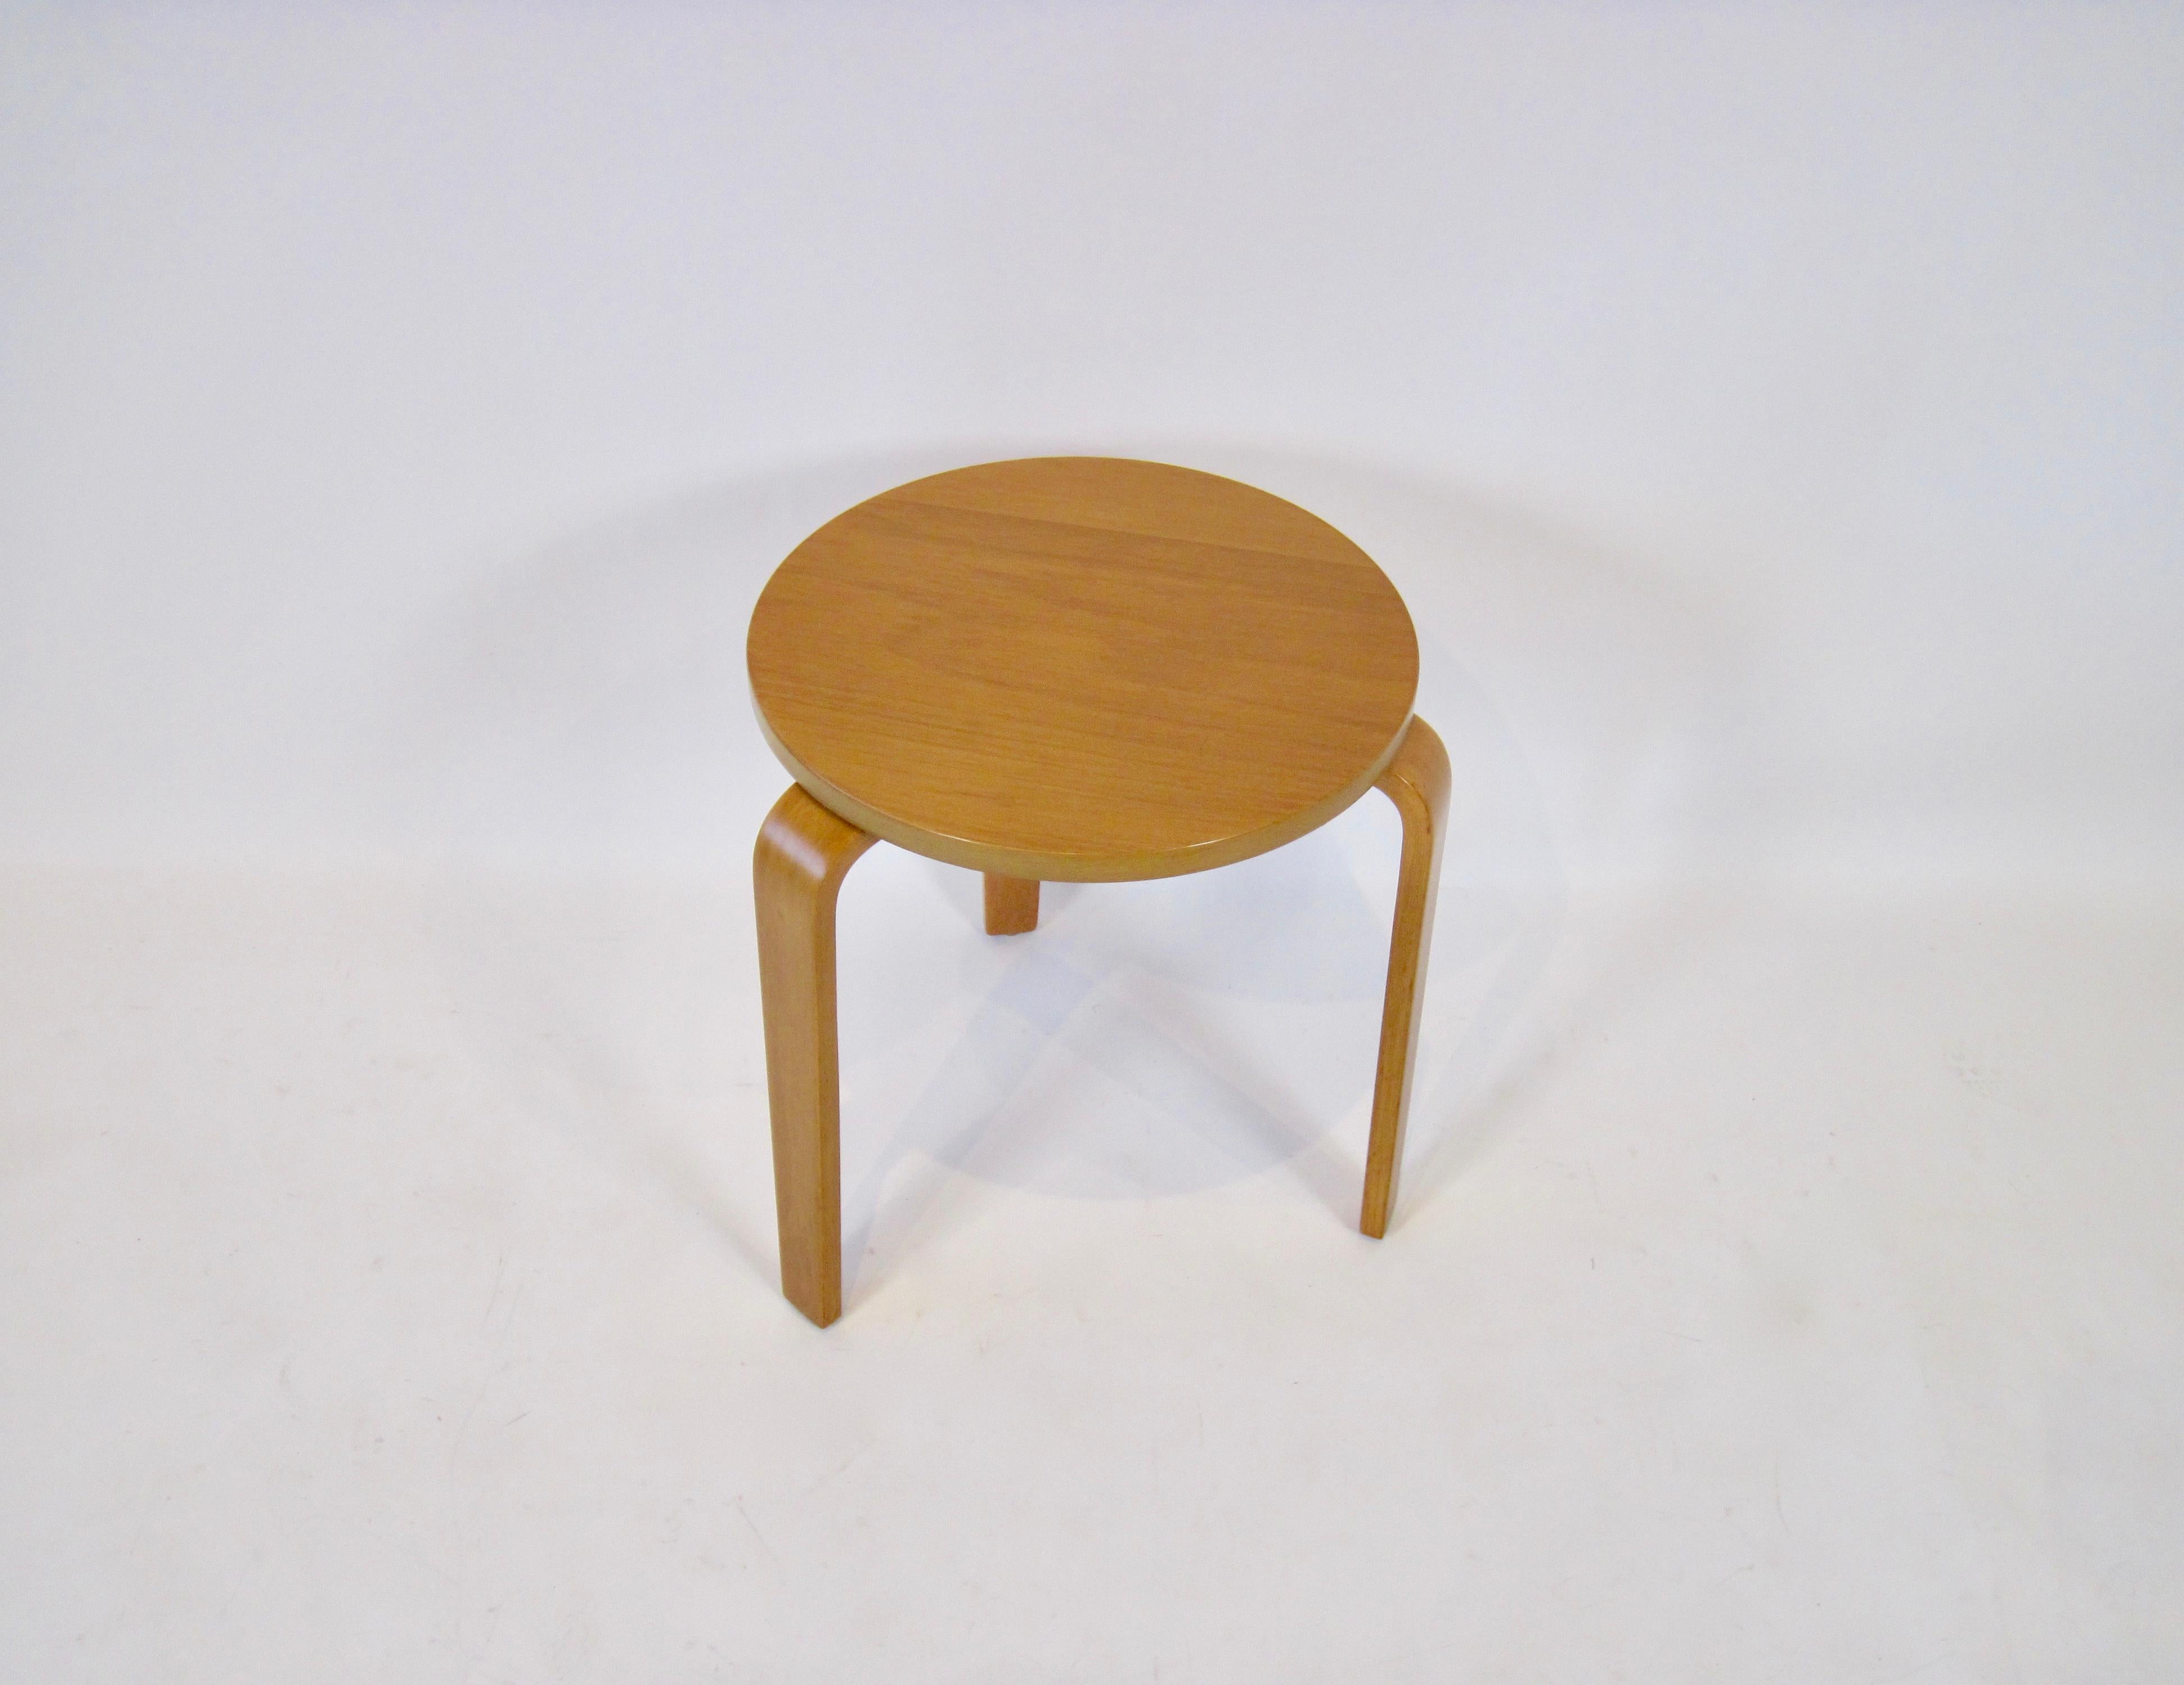 This laminated wood stool or side table by Thonet, New York and attributed to Joe Atkinson as designer. A circular top and three bentwood legs made of plywood. Perfect mid-century modern design.
Good condition - very recently and beautifully